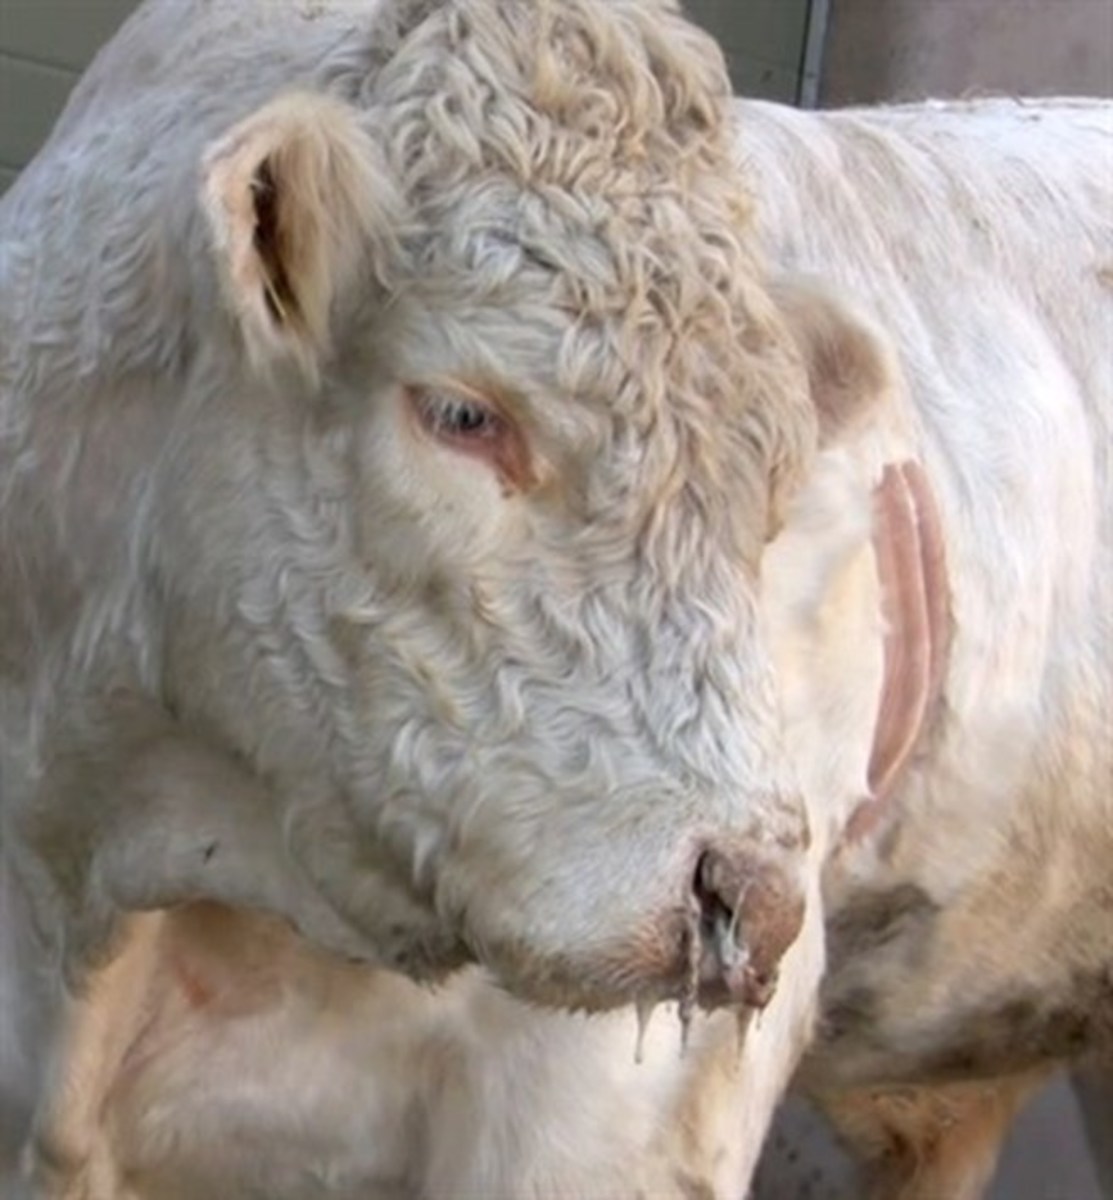 Respiratory symptoms in a Charolais bull with suspected IBR